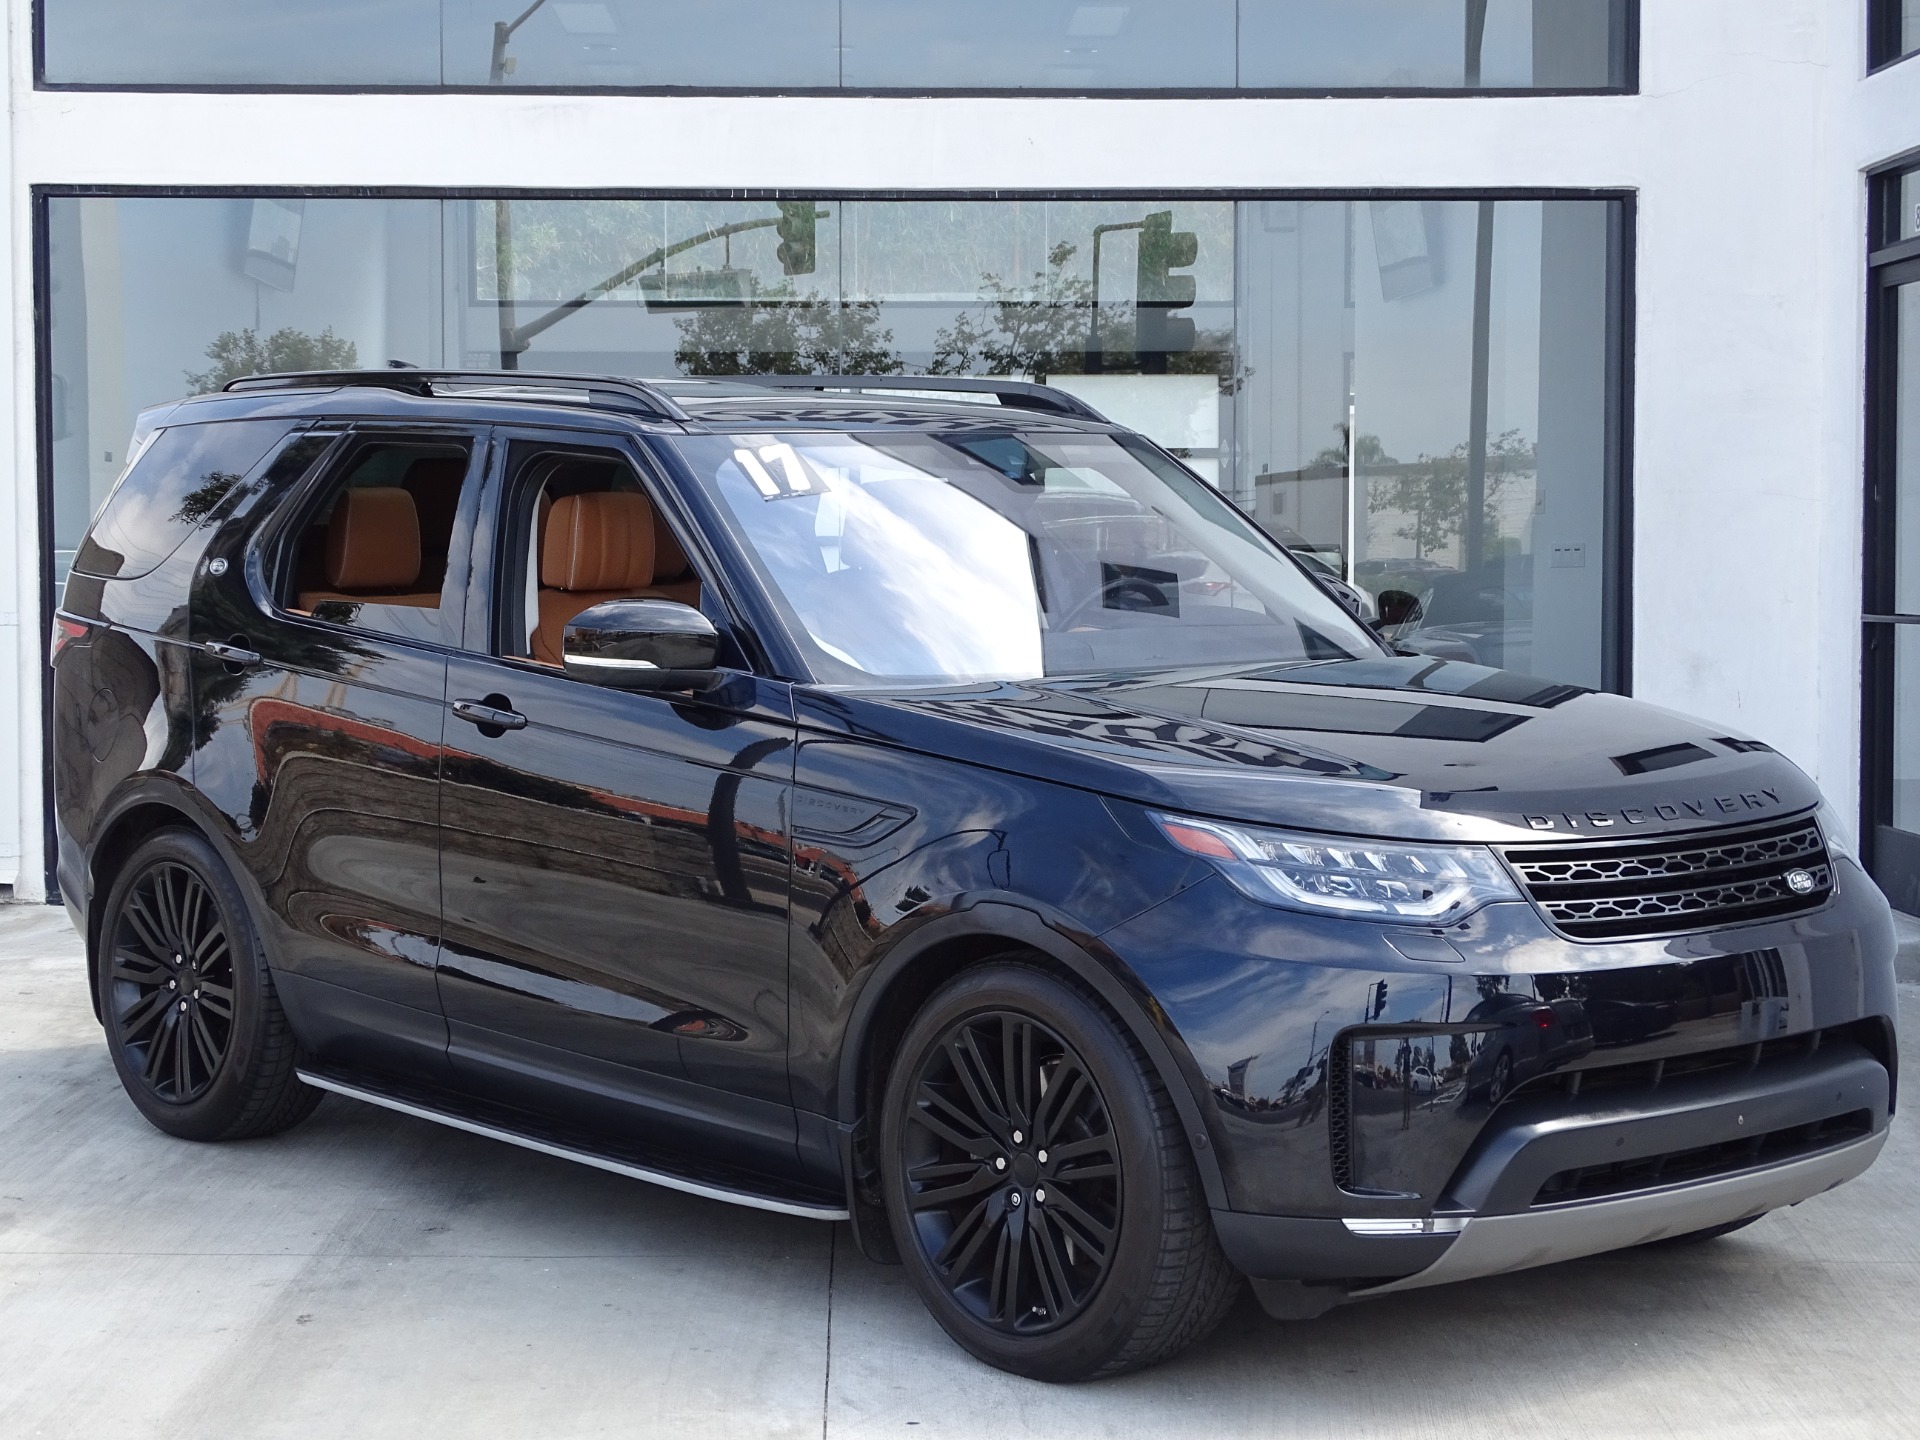 2017 Land Rover Discovery First Edition Stock 6572 For Sale Near